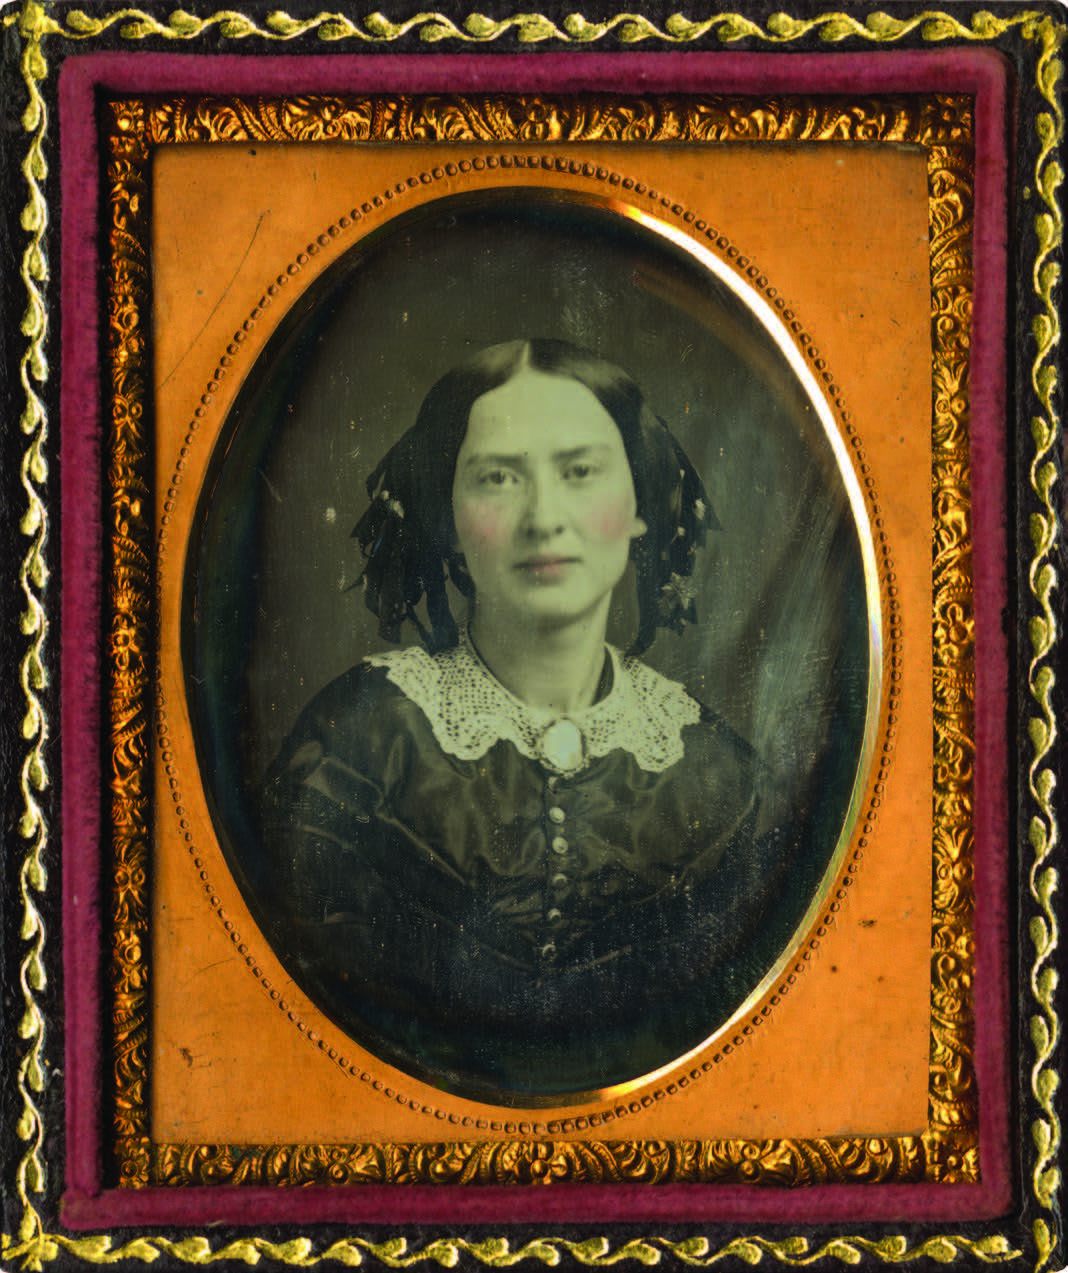 Unidentified woman. Hand-tinted ninth-plate daguerreotype, ca. Civil War era. Palace of the Governors Photo Archives (NMHM/DCA), Neg. No. 65796.